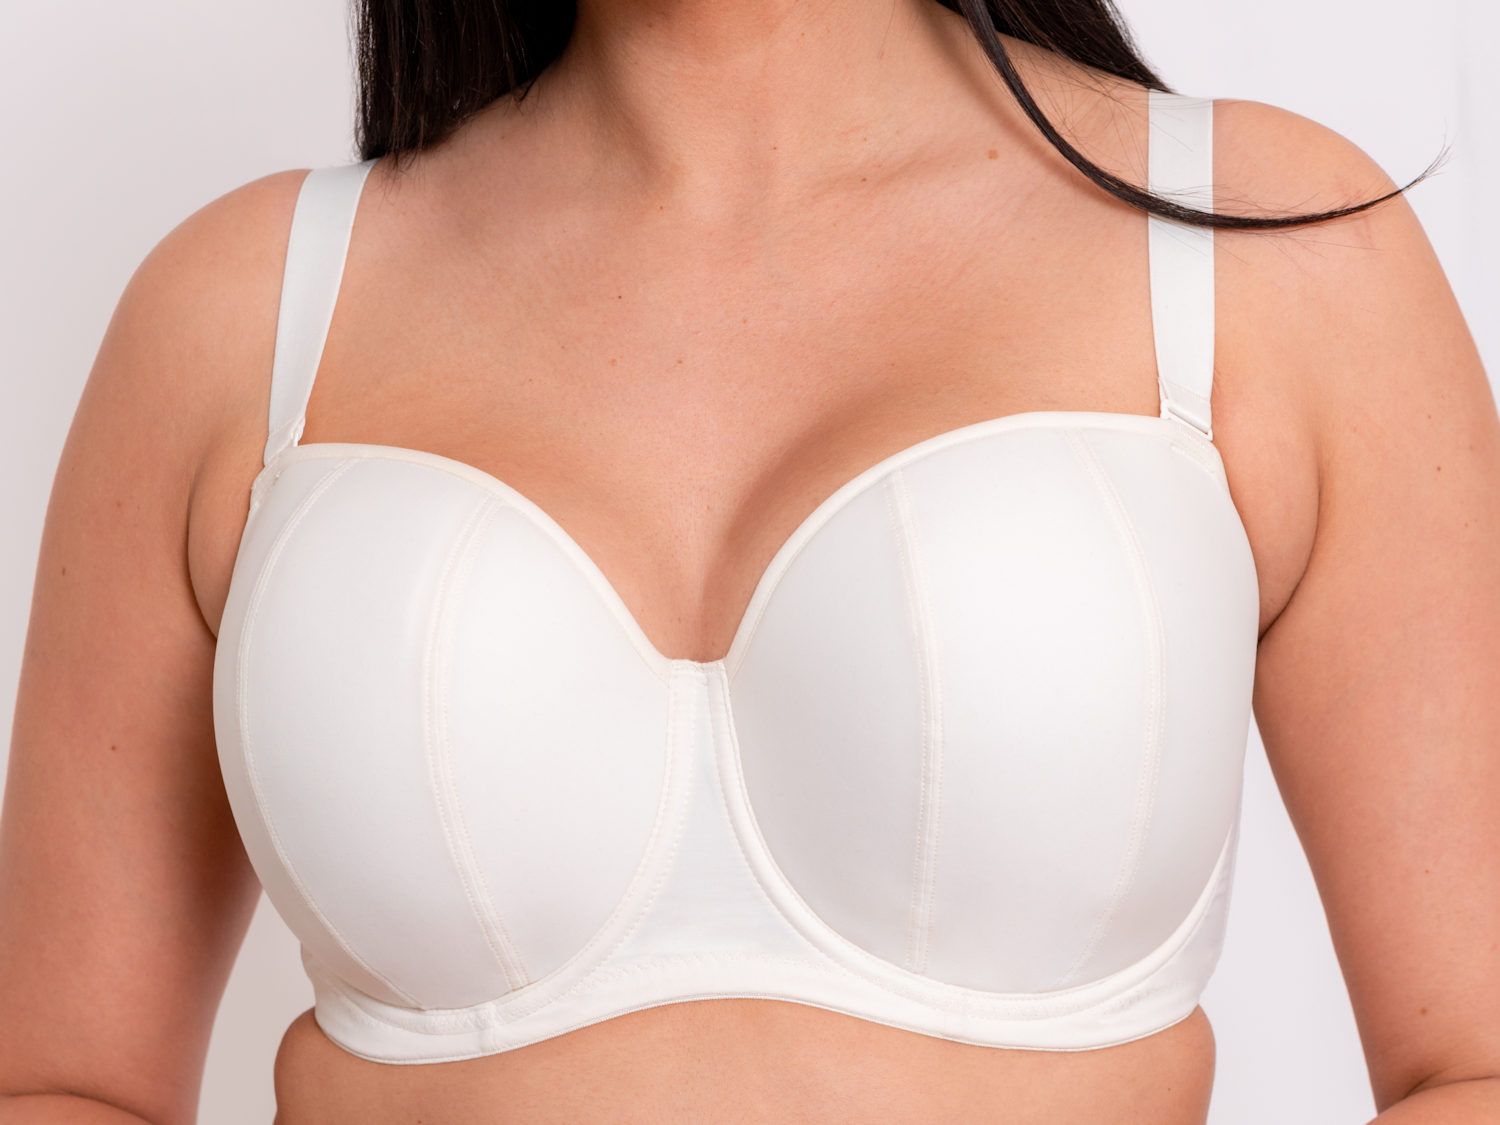 Back Size 44 Strapless & Multiway Bras, band size 44